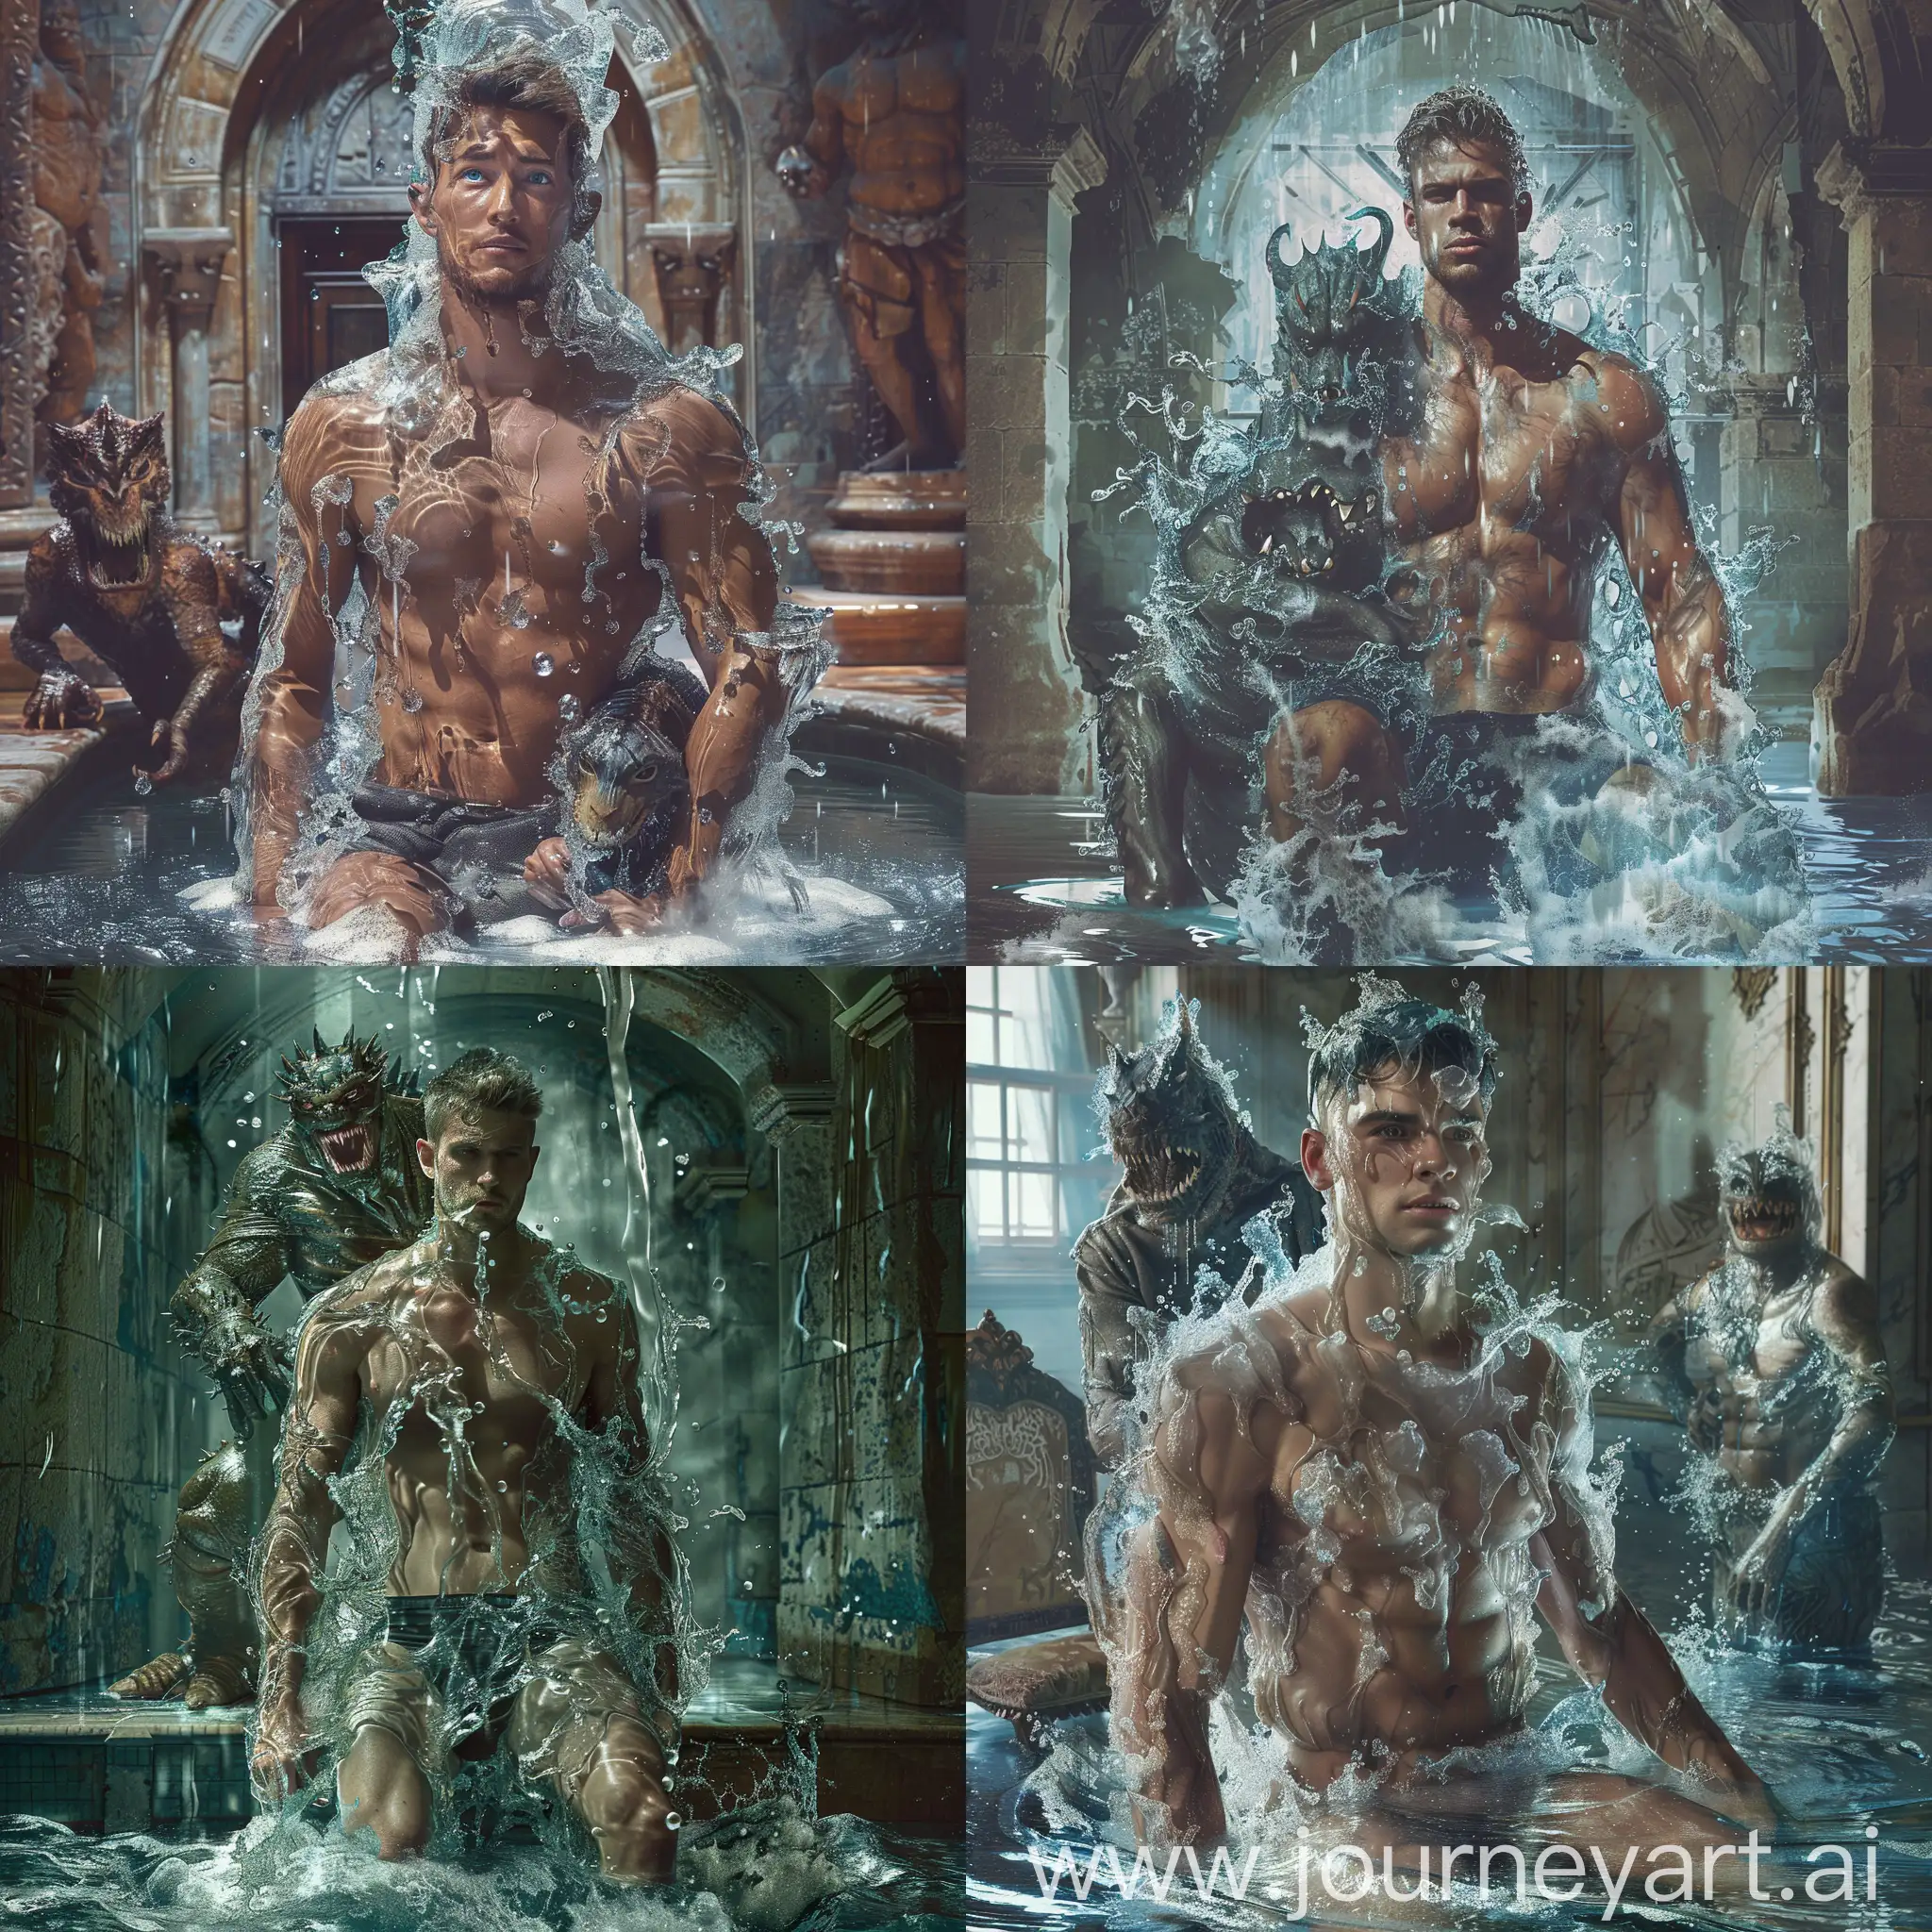 full body of a detailed fantasy artwork of a handsome Caucasian shirtless tall man. the man IS MADE ENTIRELY OF water, another EVIL MONSTER sitting on a handsome man in a mysterious magic room. Capture the intricate water details,. Ensure high-quality visuals with rich colors, textures, and shadows. realistic style